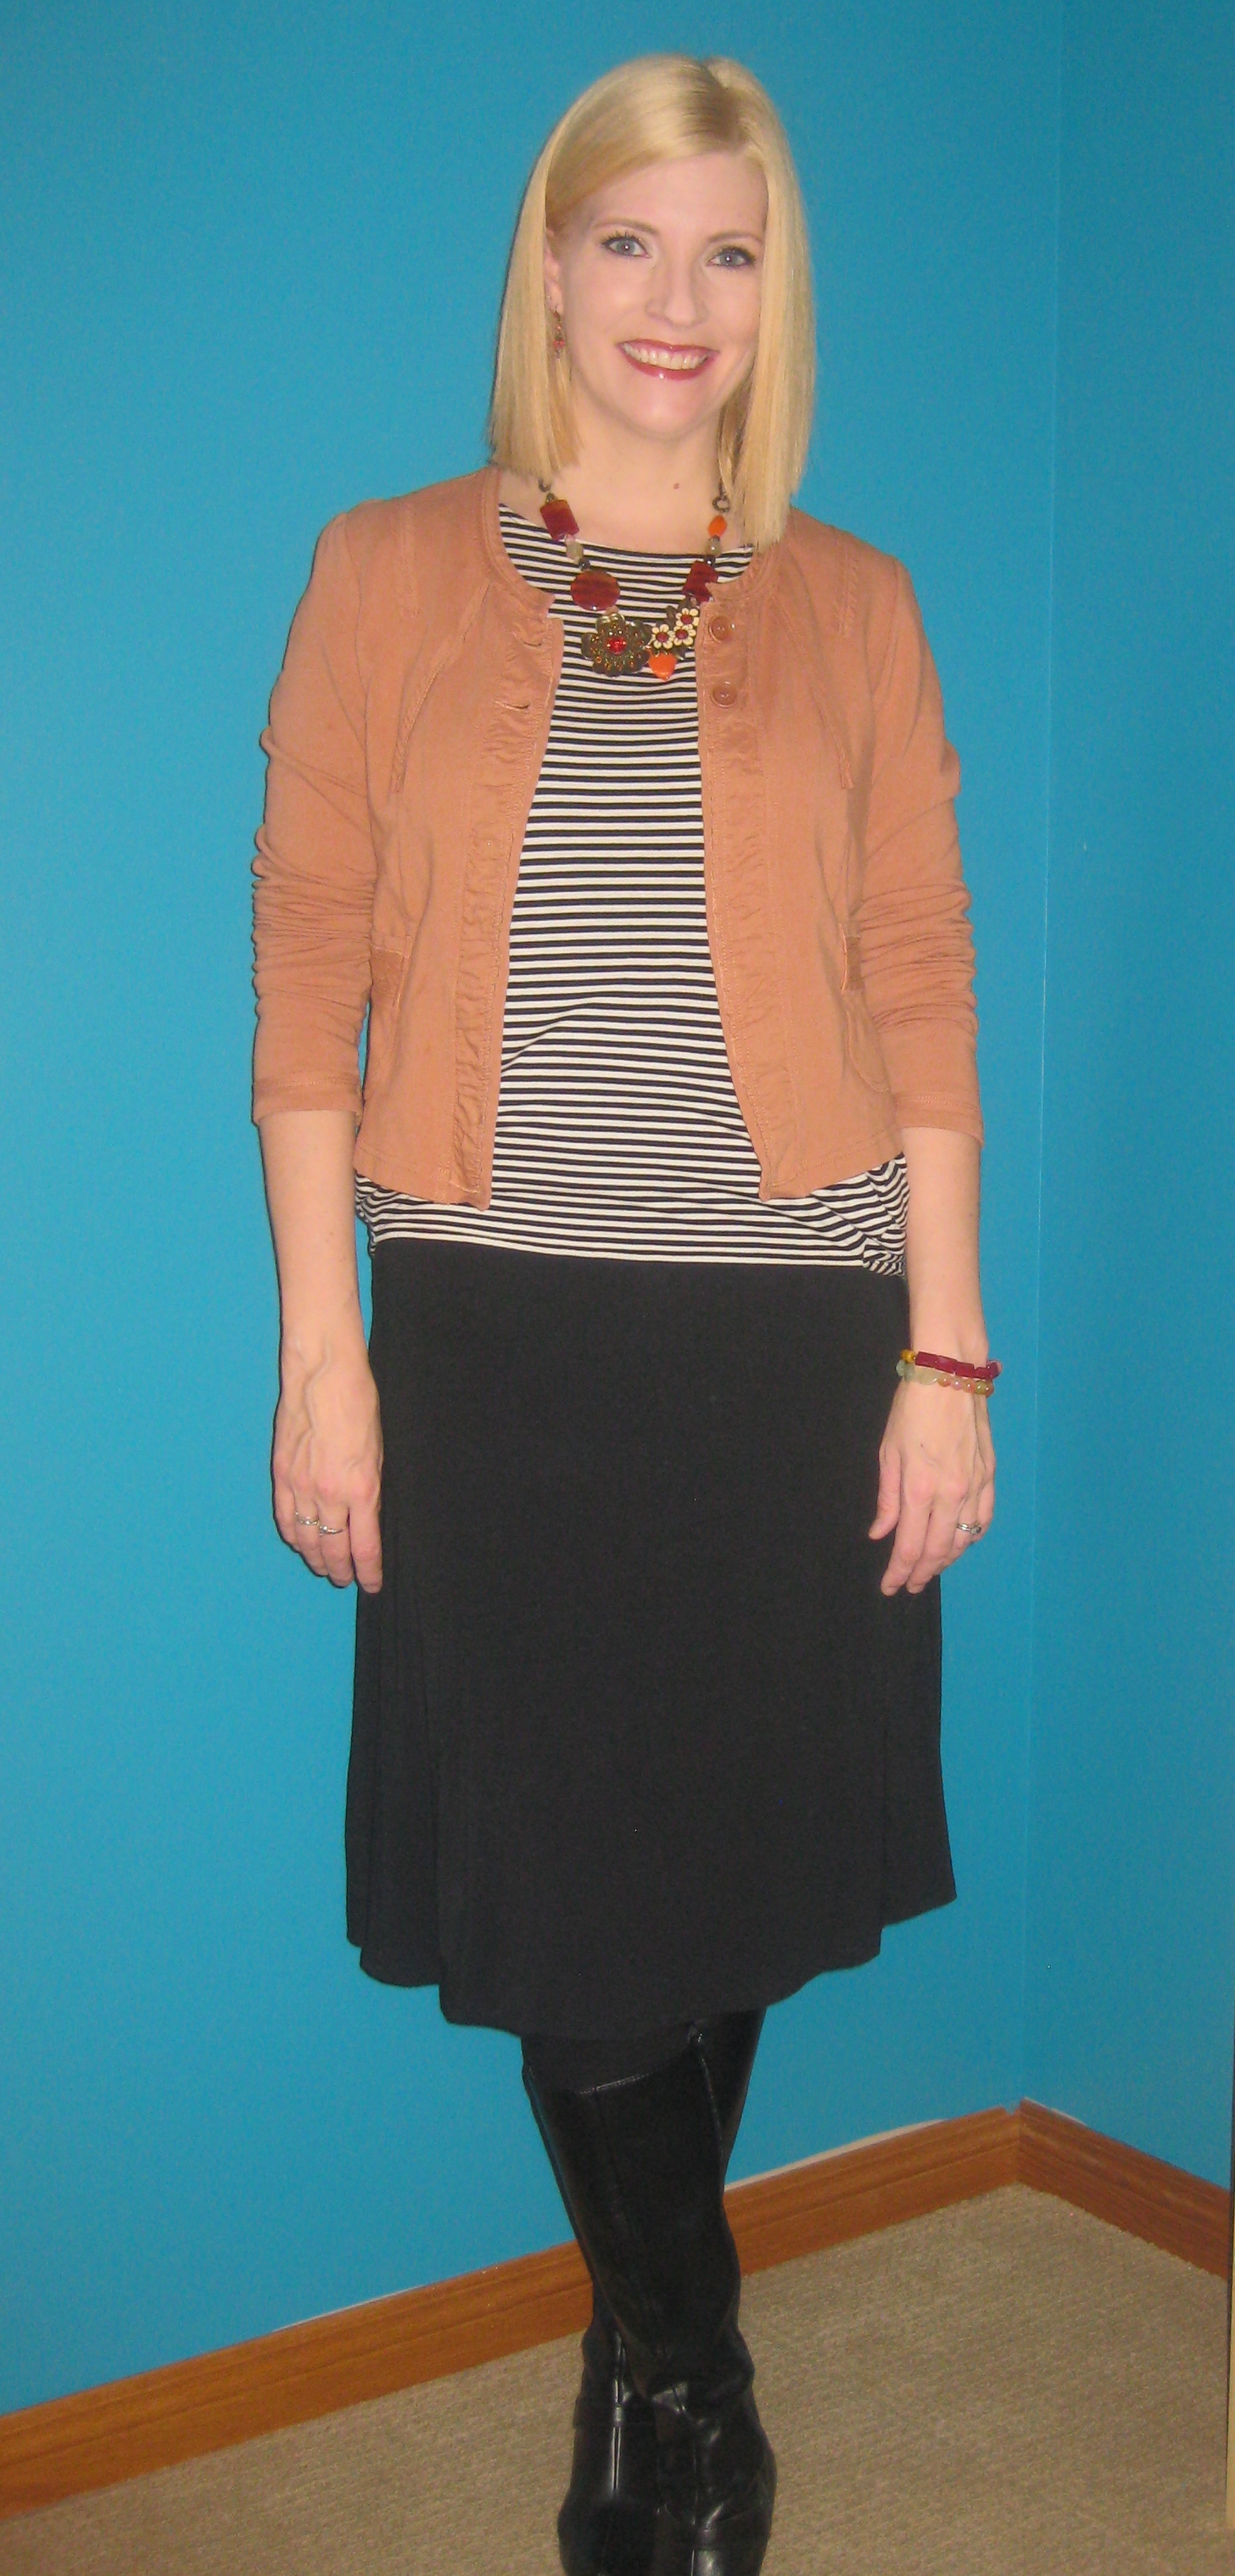 And complete the look with a finishing piece - Sandwich blazer $5 - and accessories, by She Does Create